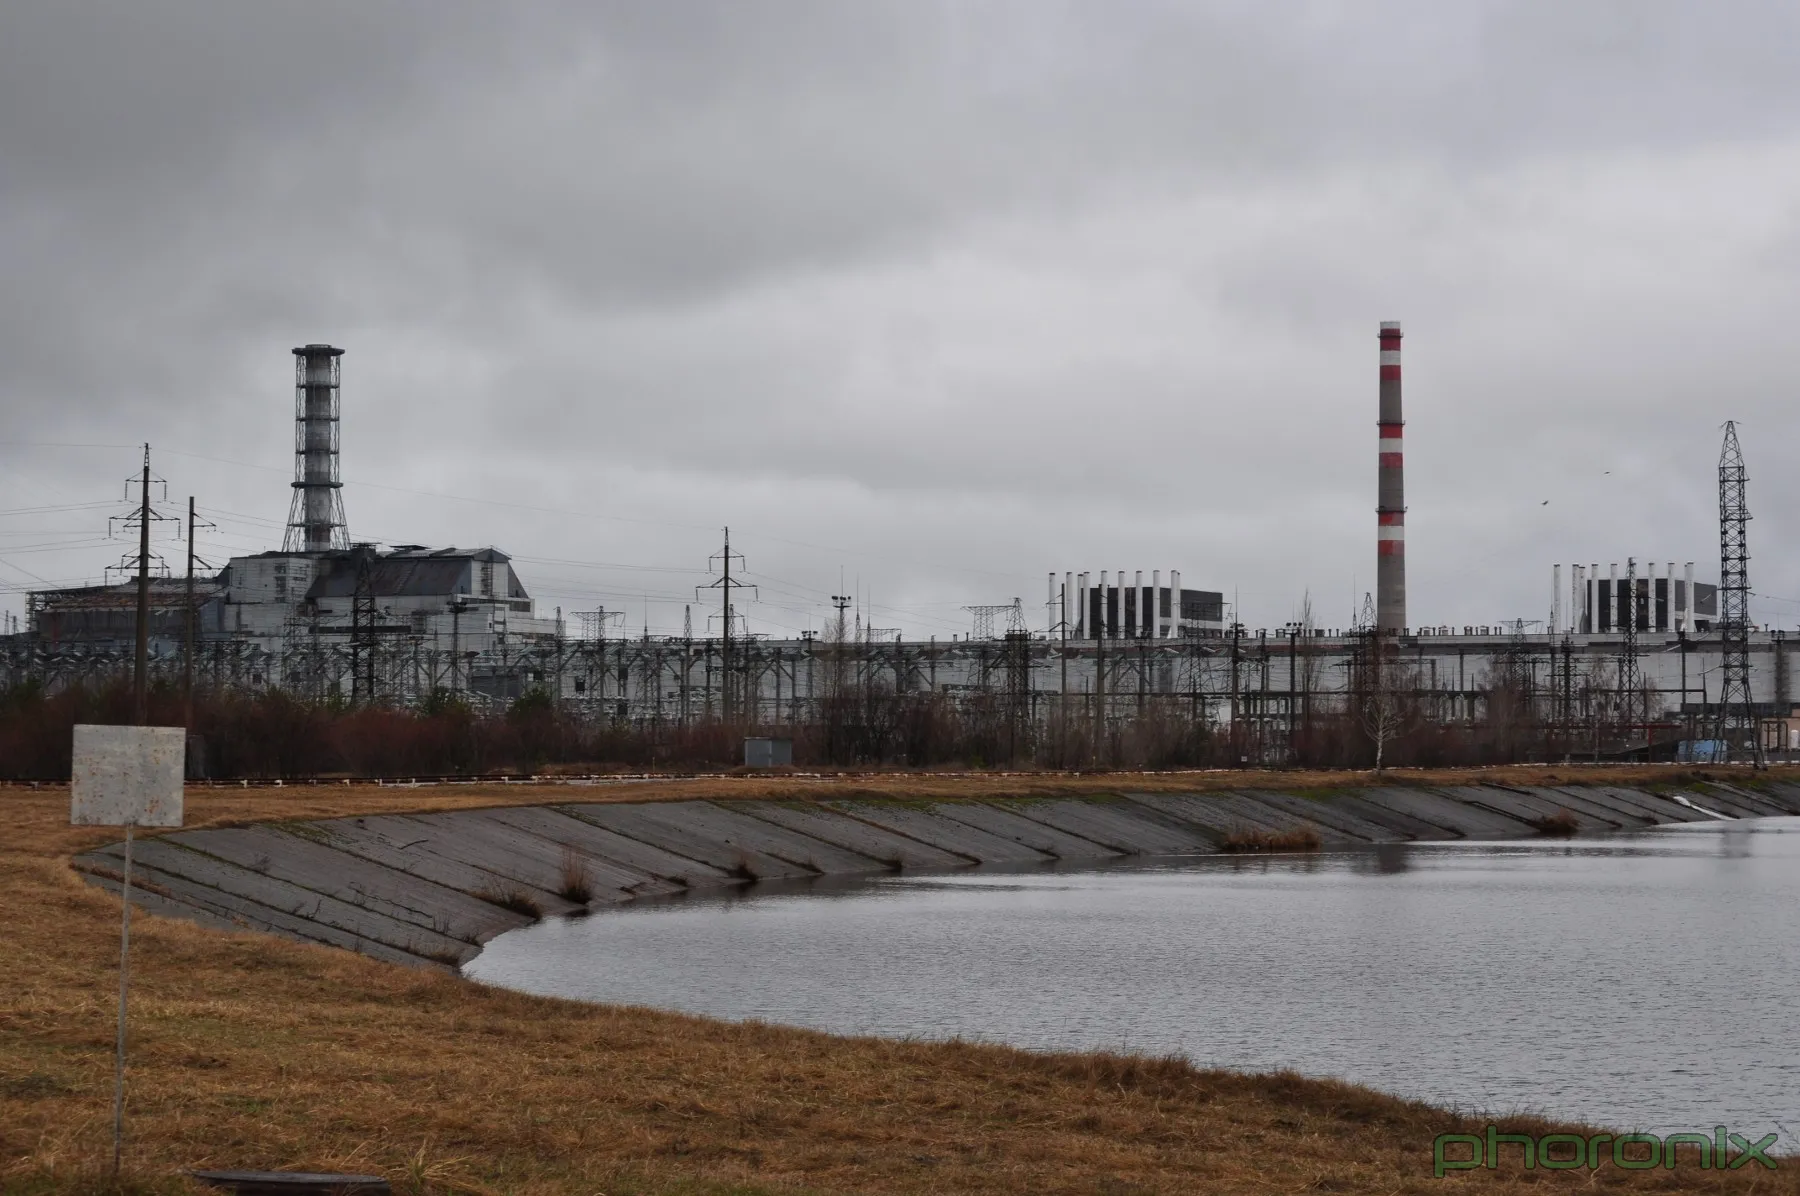 [Phoronix] Touring Chernobyl In 2010: A View of Reactors #3, #4